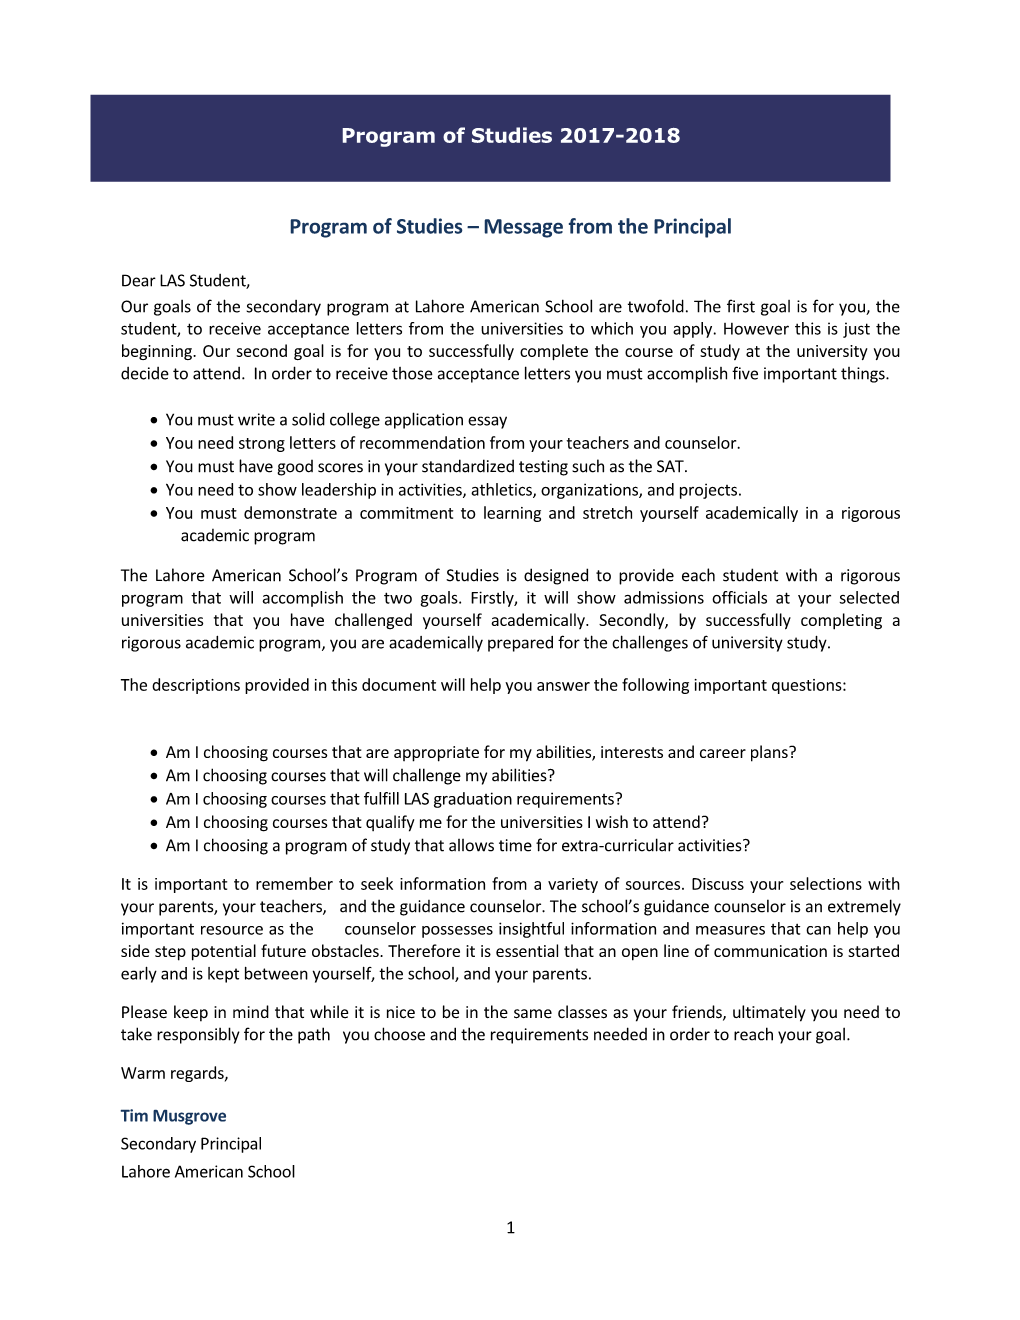 Program of Studies – Message from the Principal